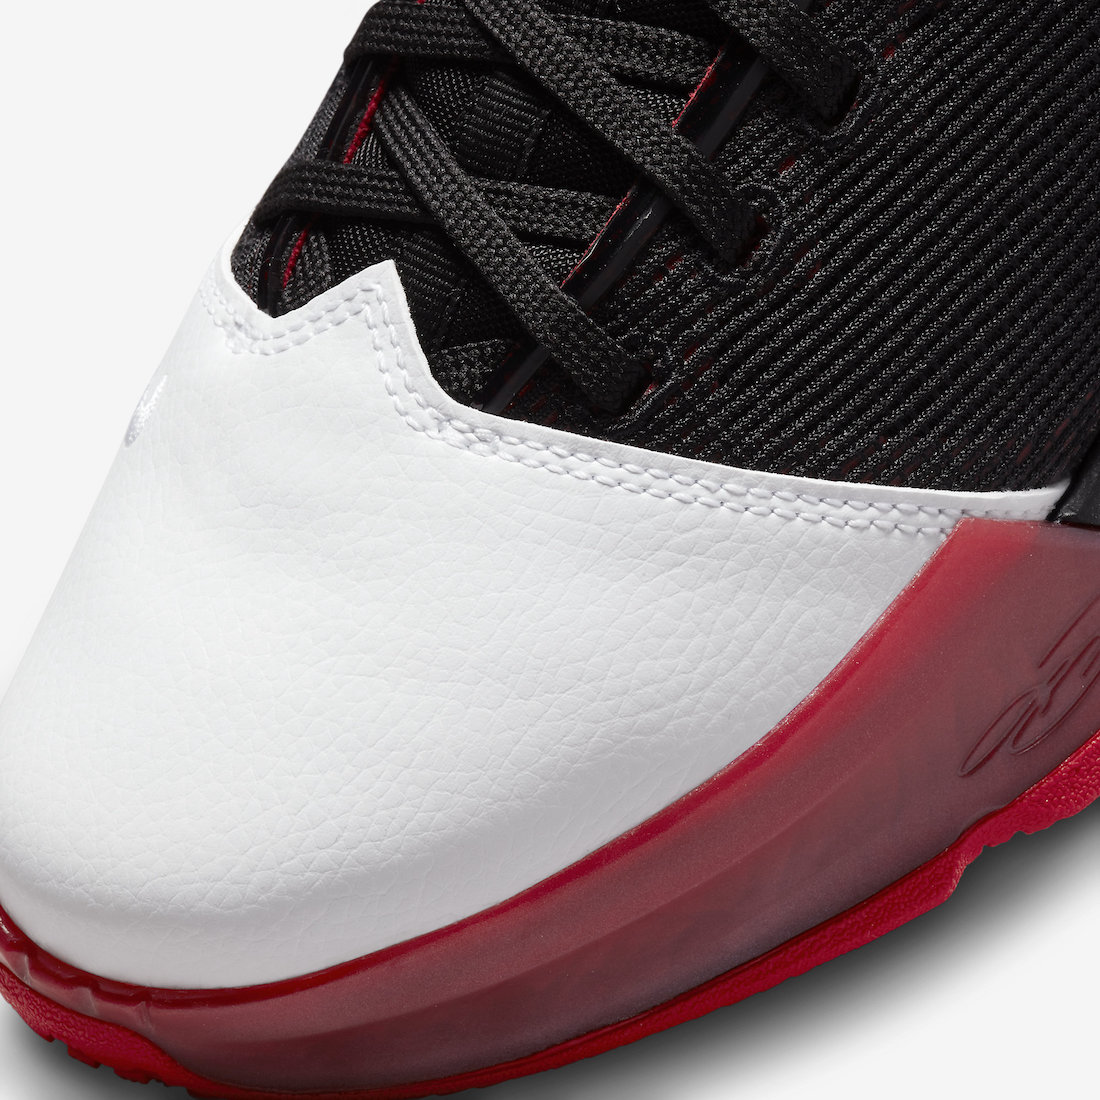 Nike LeBron 19 Low Bred DH1270 001 Release Date 6